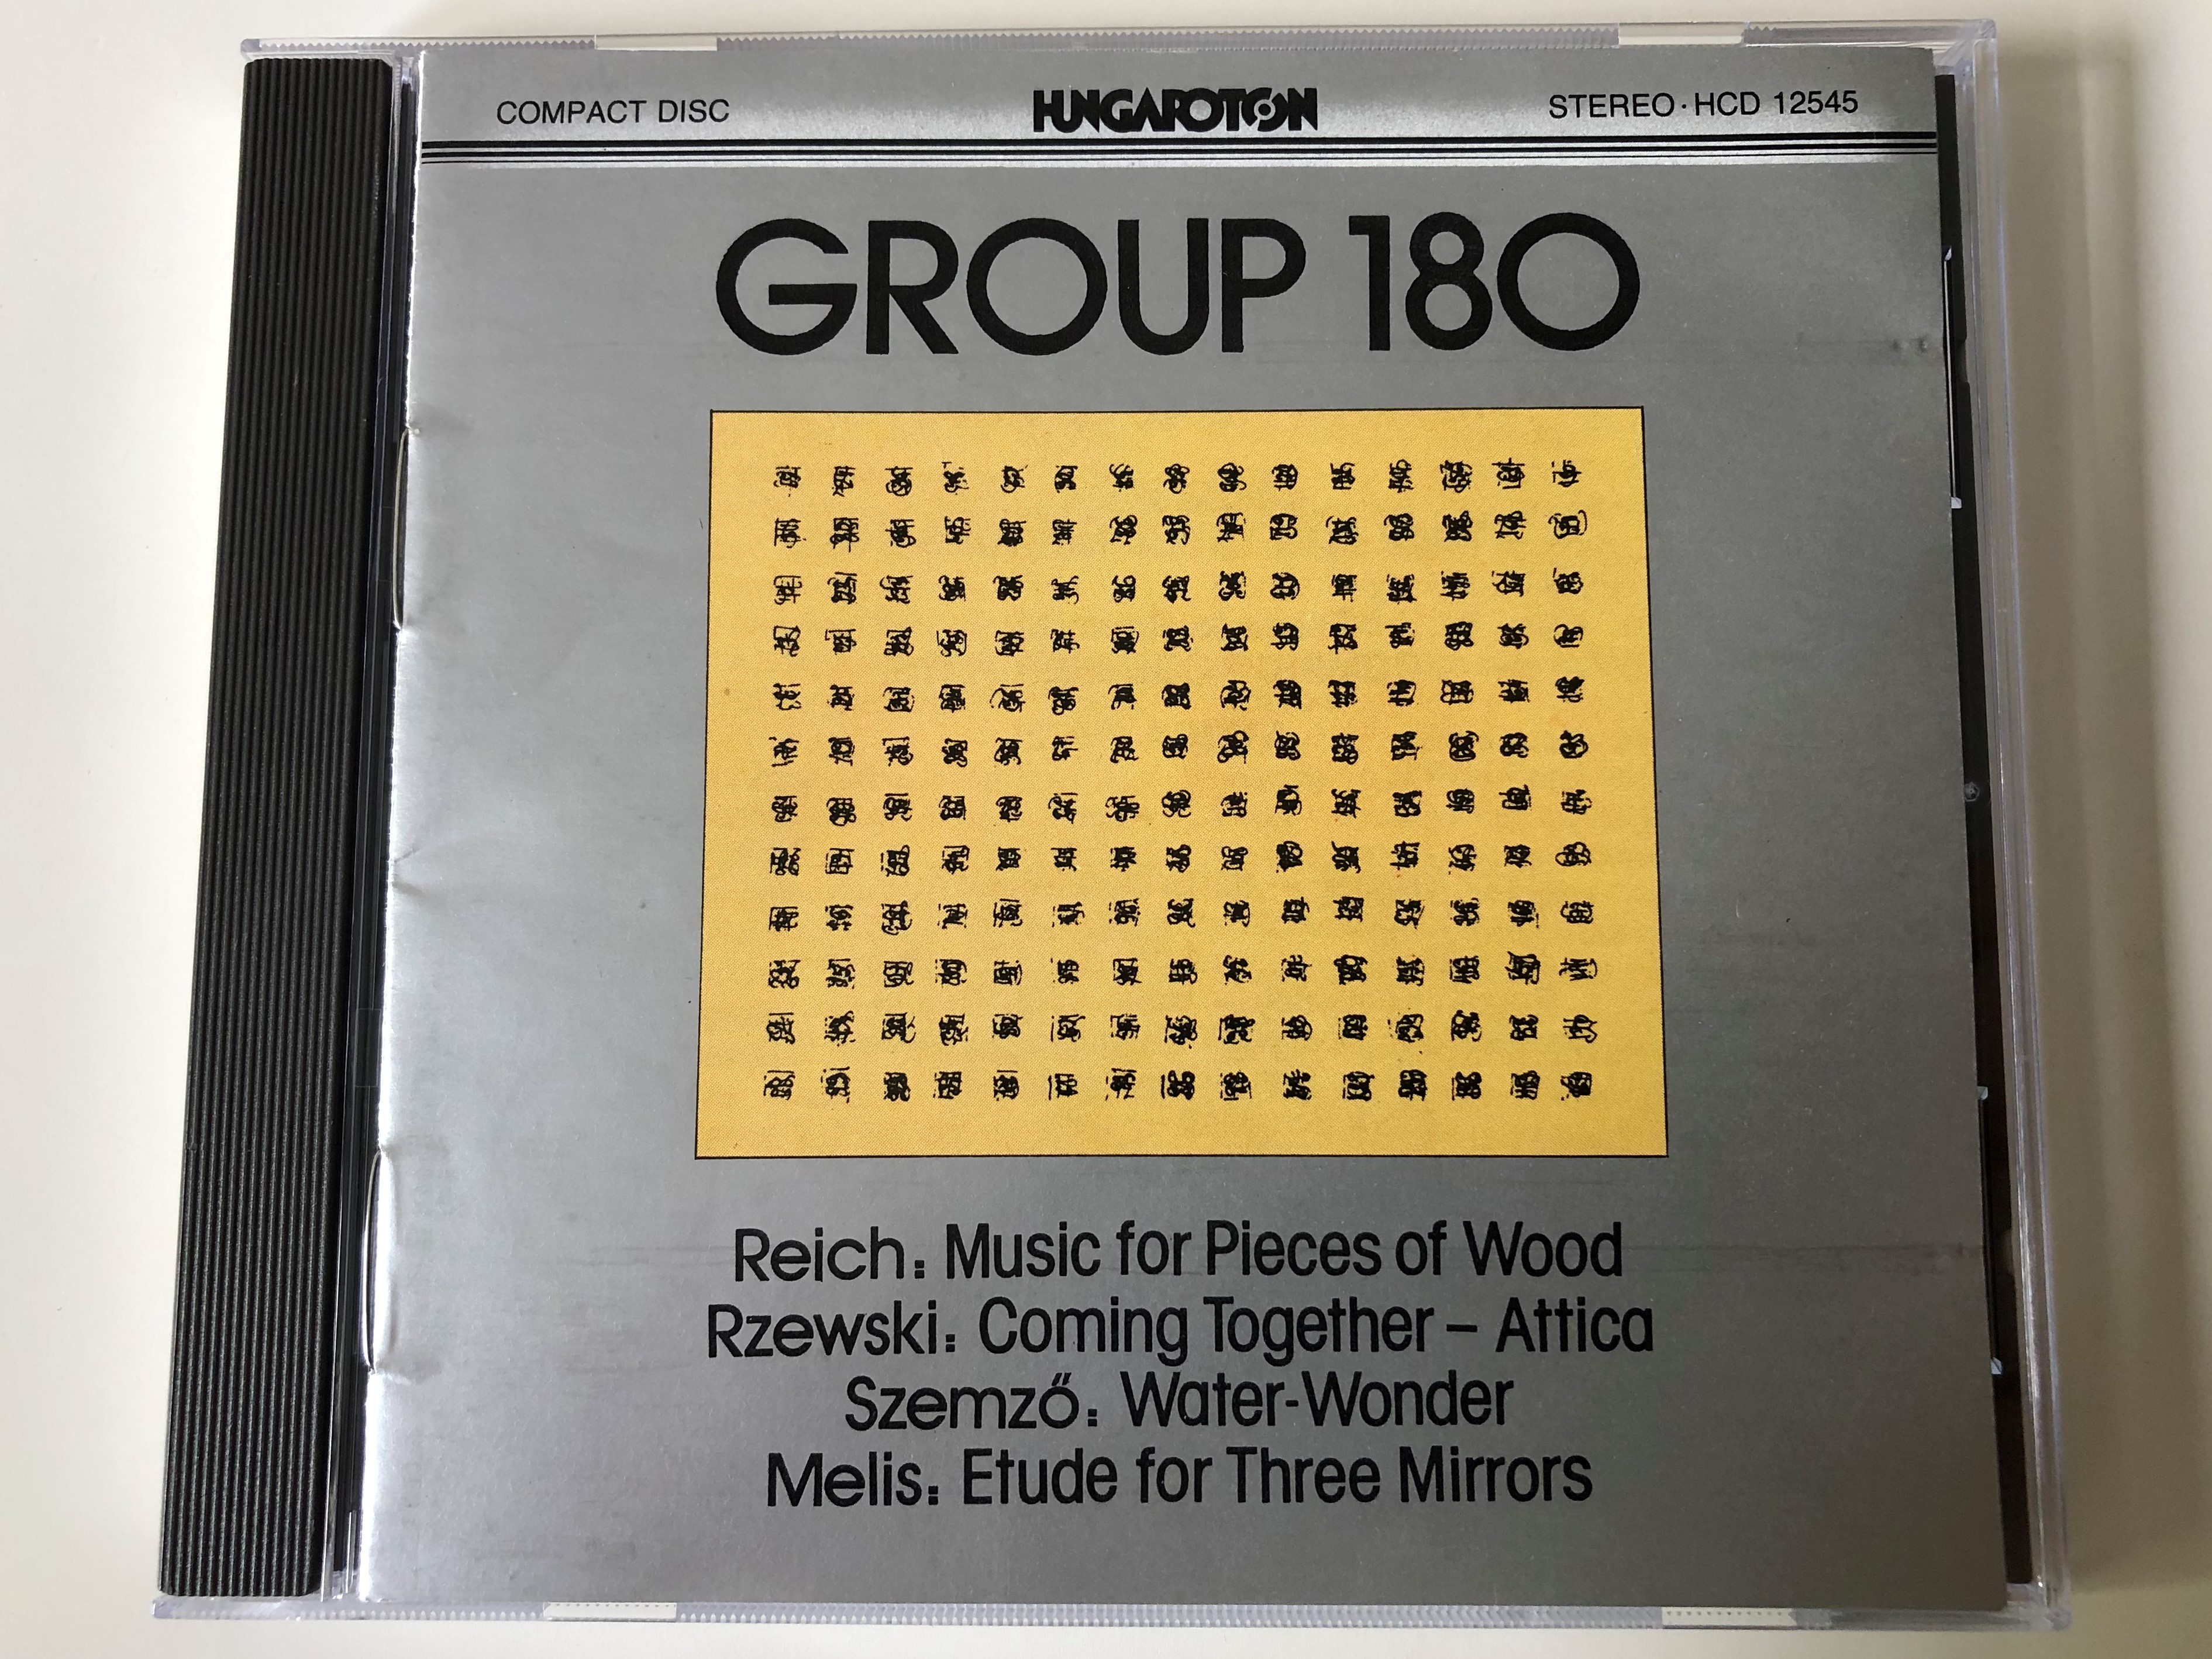 group-180-reich-music-for-pieces-of-wood-rzewski-coming-together-attica-szemz-water-wonder-melis-etude-for-three-mirrors-hungaroton-audio-cd-1983-stereo-hcd-12545-1-.jpg